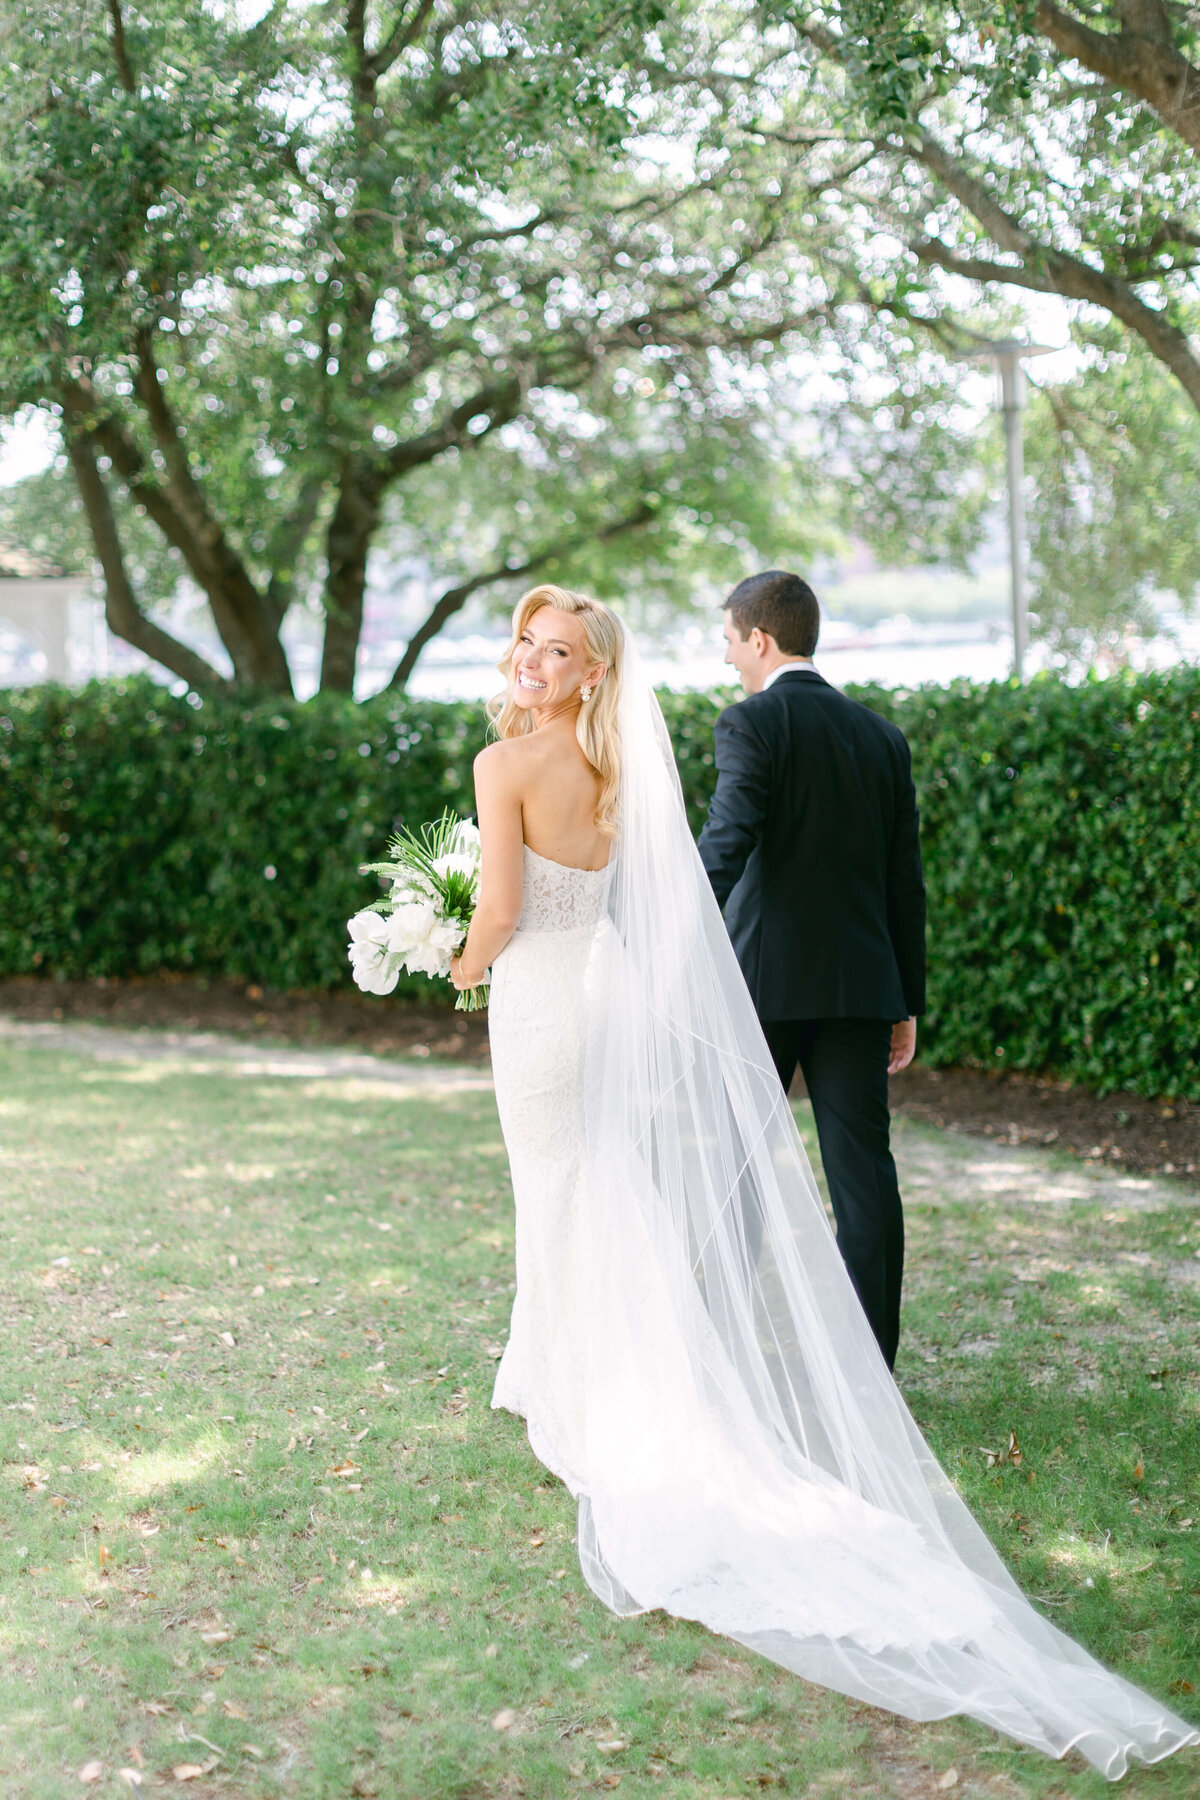 A bride smiles over her shoulder while following her groom.